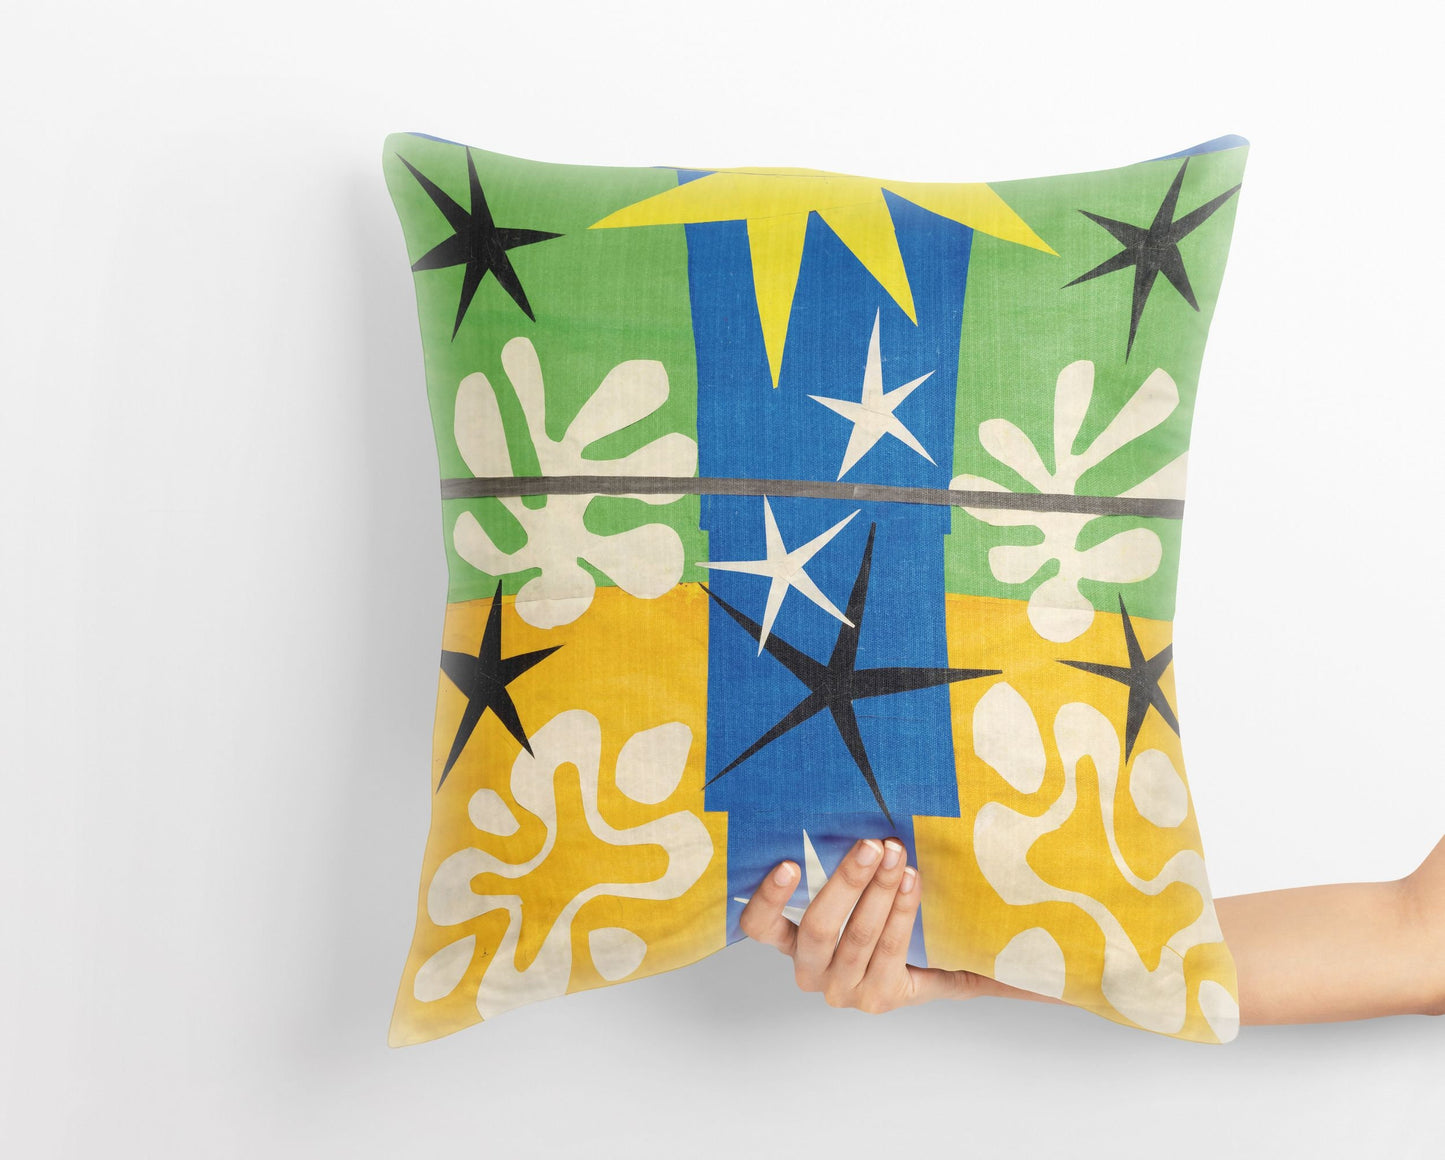 Henri Matisse Famous Painting, Decorative Pillow, Abstract Throw Pillow Cover, Designer Pillow, Colorful Pillow Case, 18 X 18 Pillow Covers